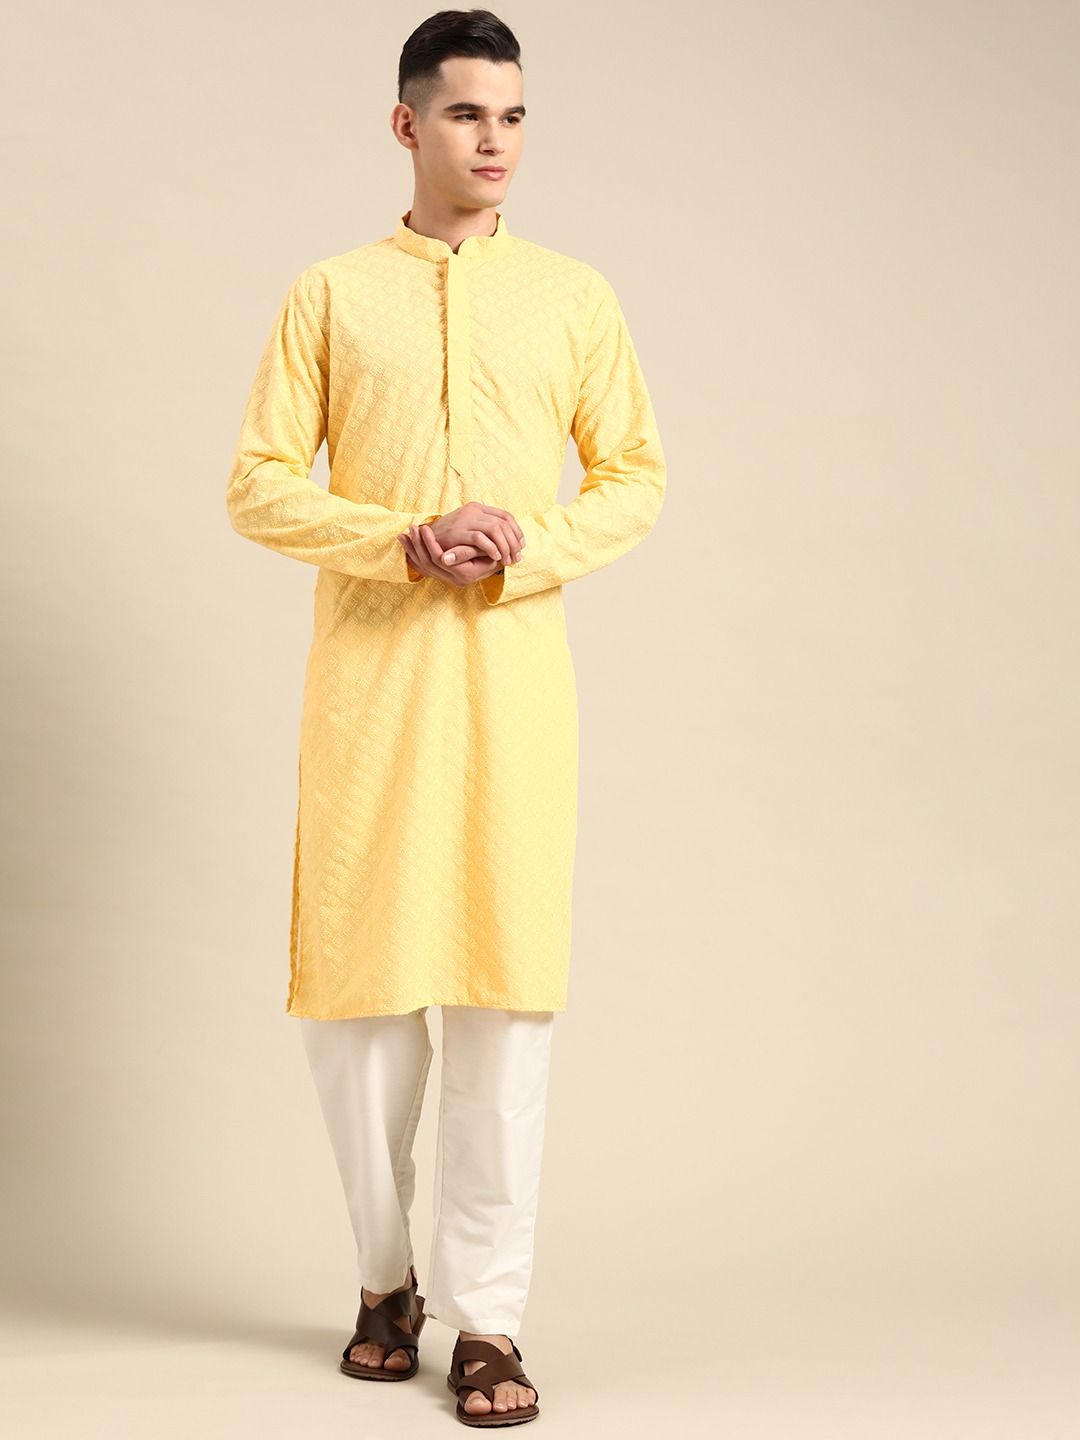 Buy Men's Clothing, Footwear, and Accessories Online at Fabindia